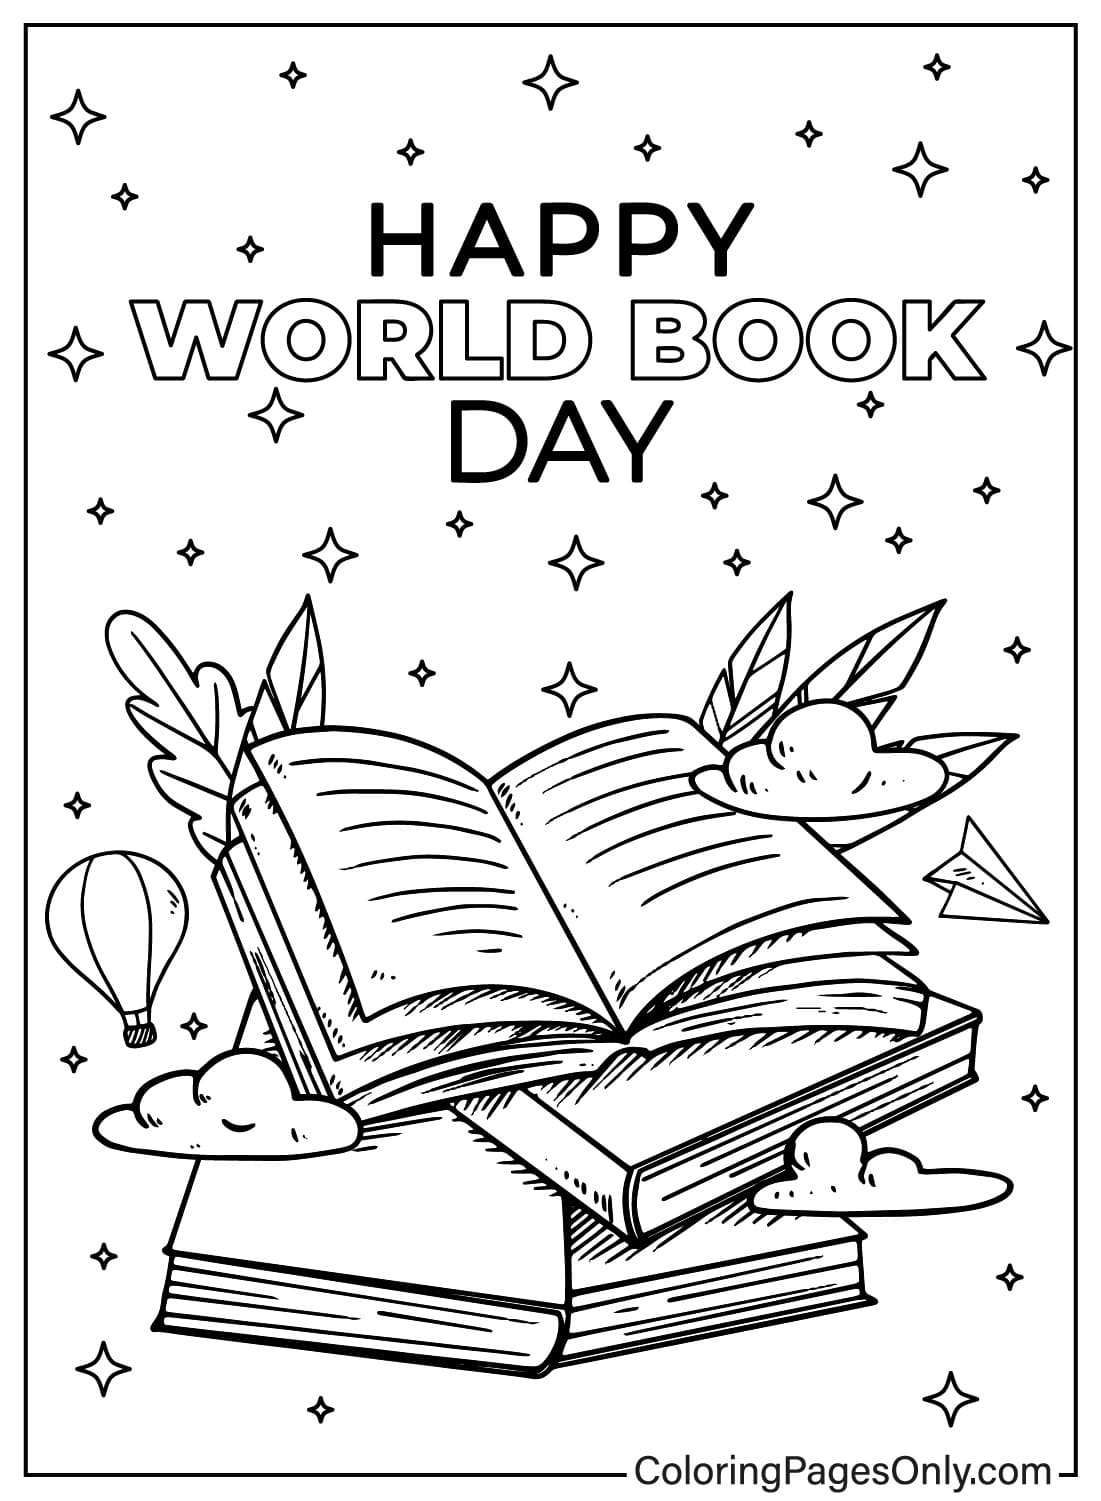 World Book Day Coloring Pages to for Kids from World Book Day